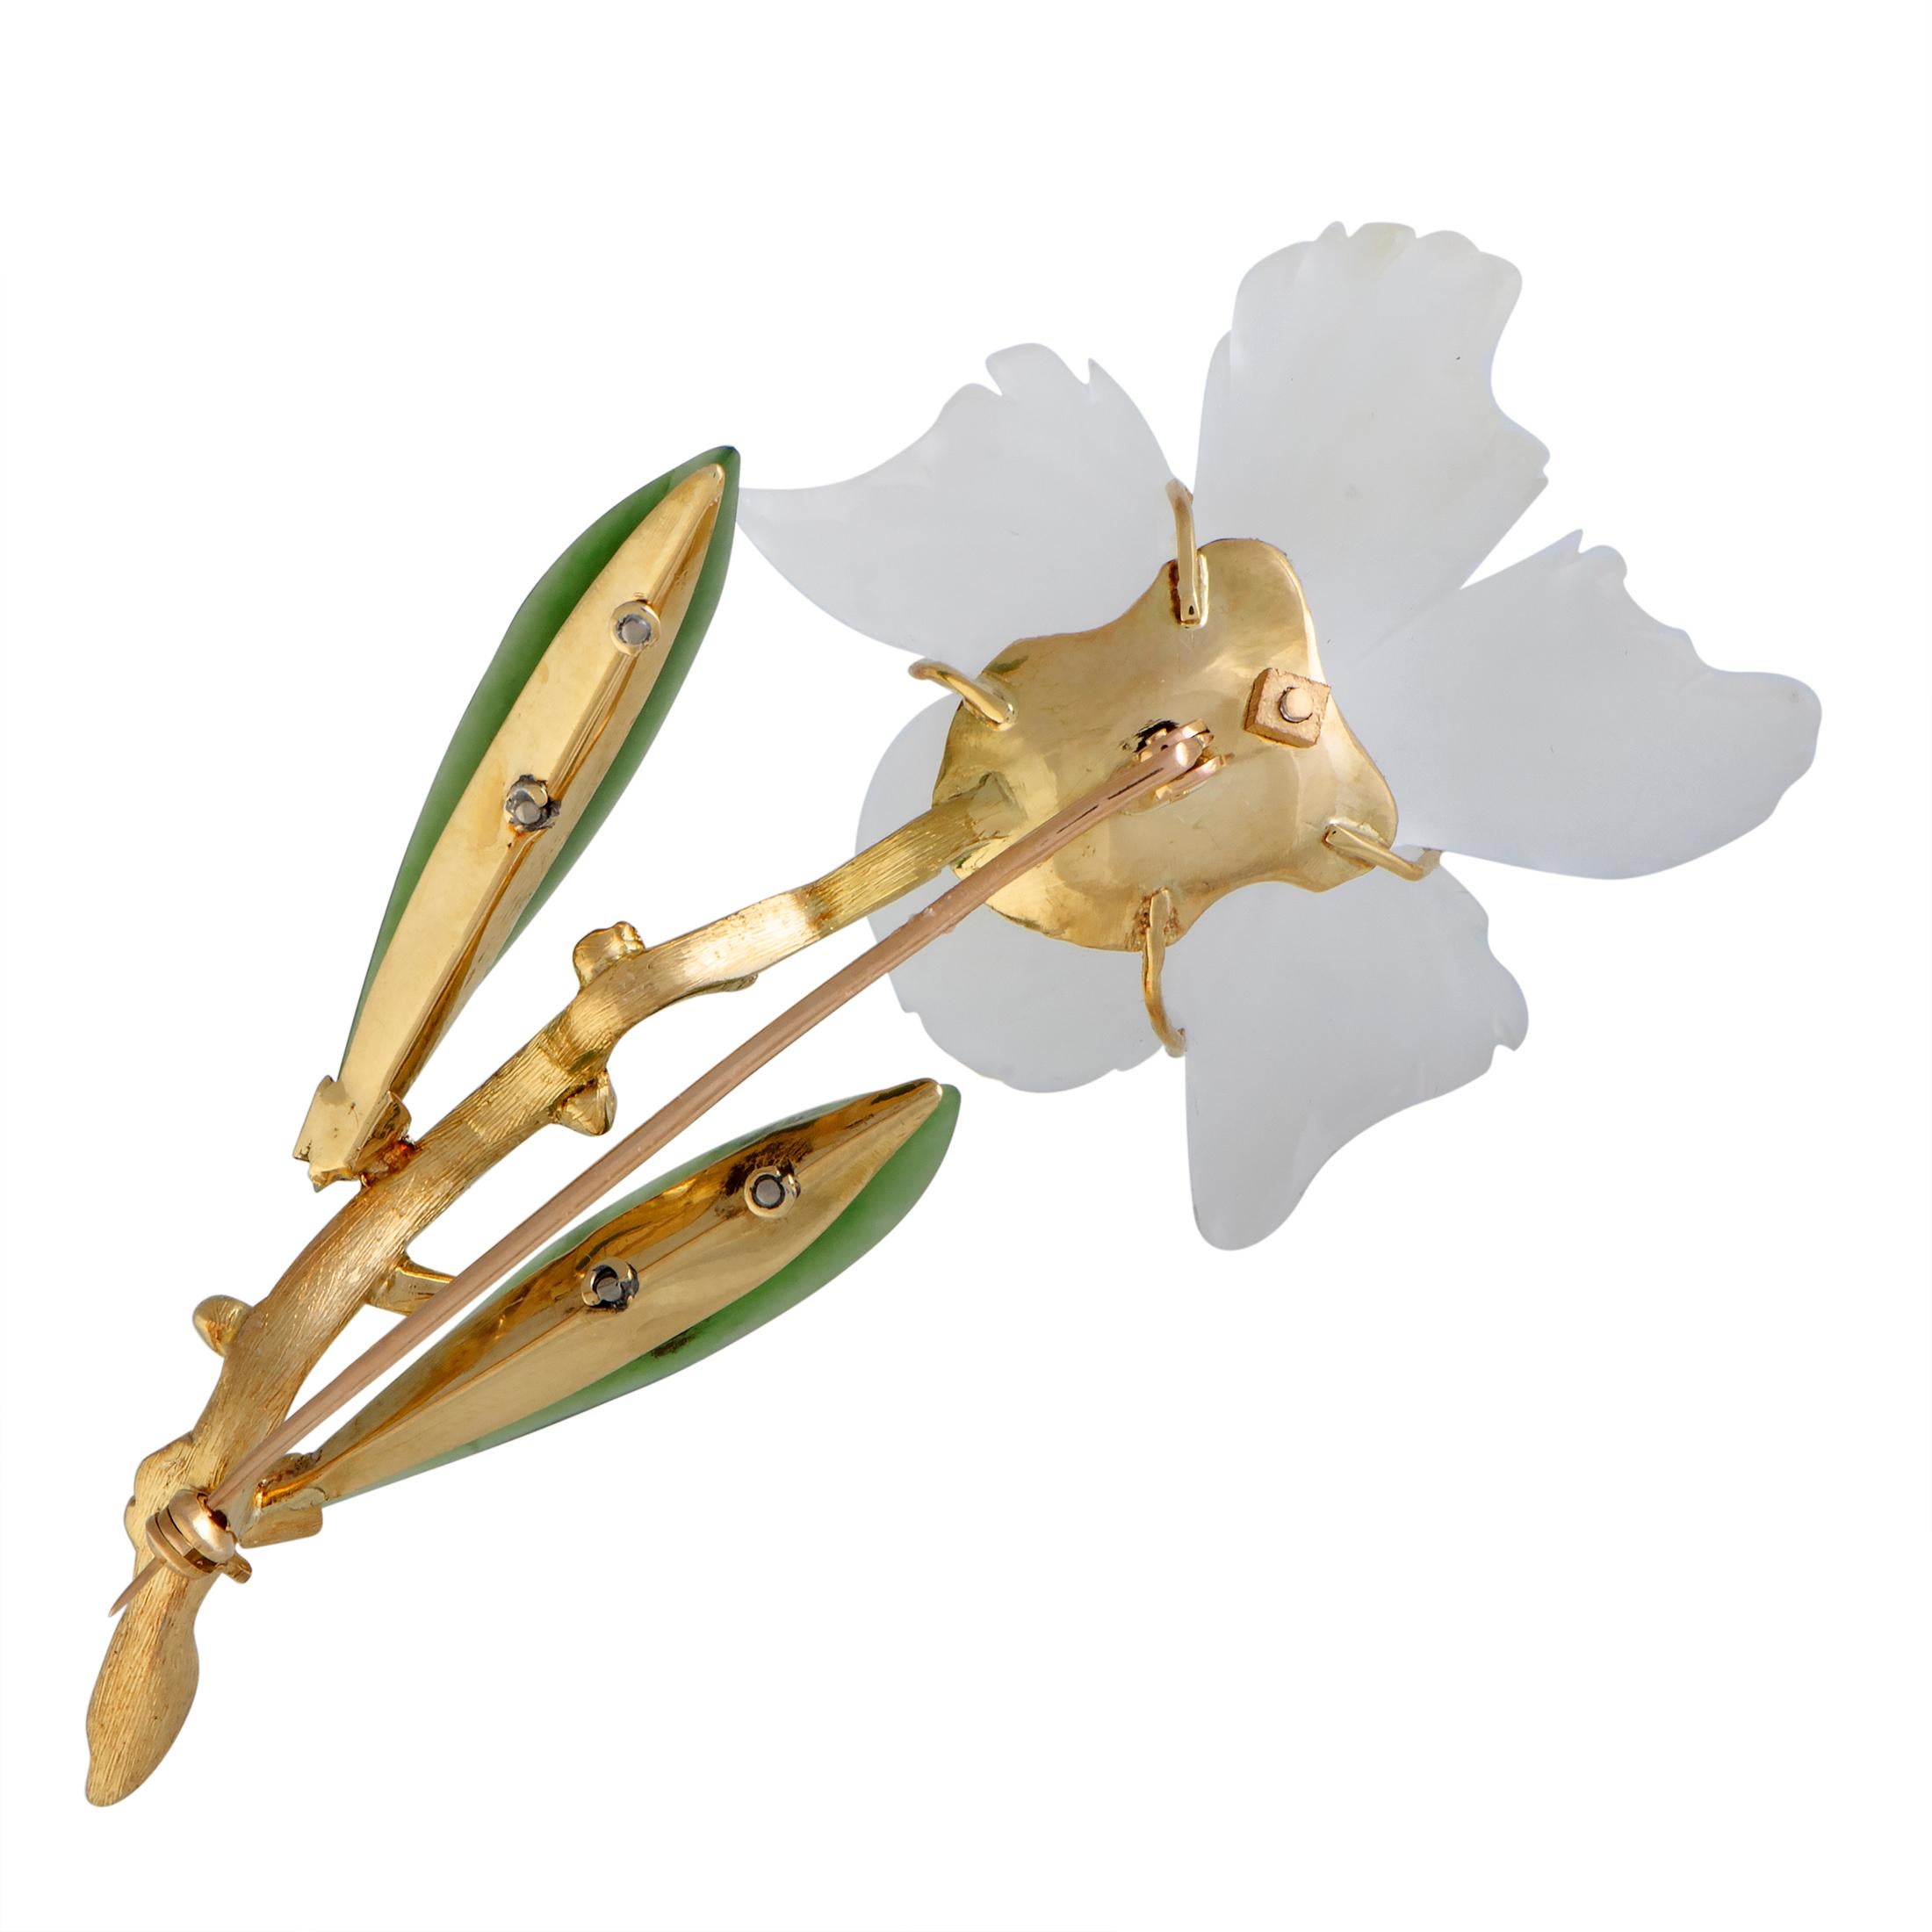 This exceptional flower brooch boasts a splendidly feminine appeal and it will accentuate your look in a most charming manner. Exquisitely made of luxurious 18K yellow gold, the brooch is beautifully decorated with sparkling diamond stones and with